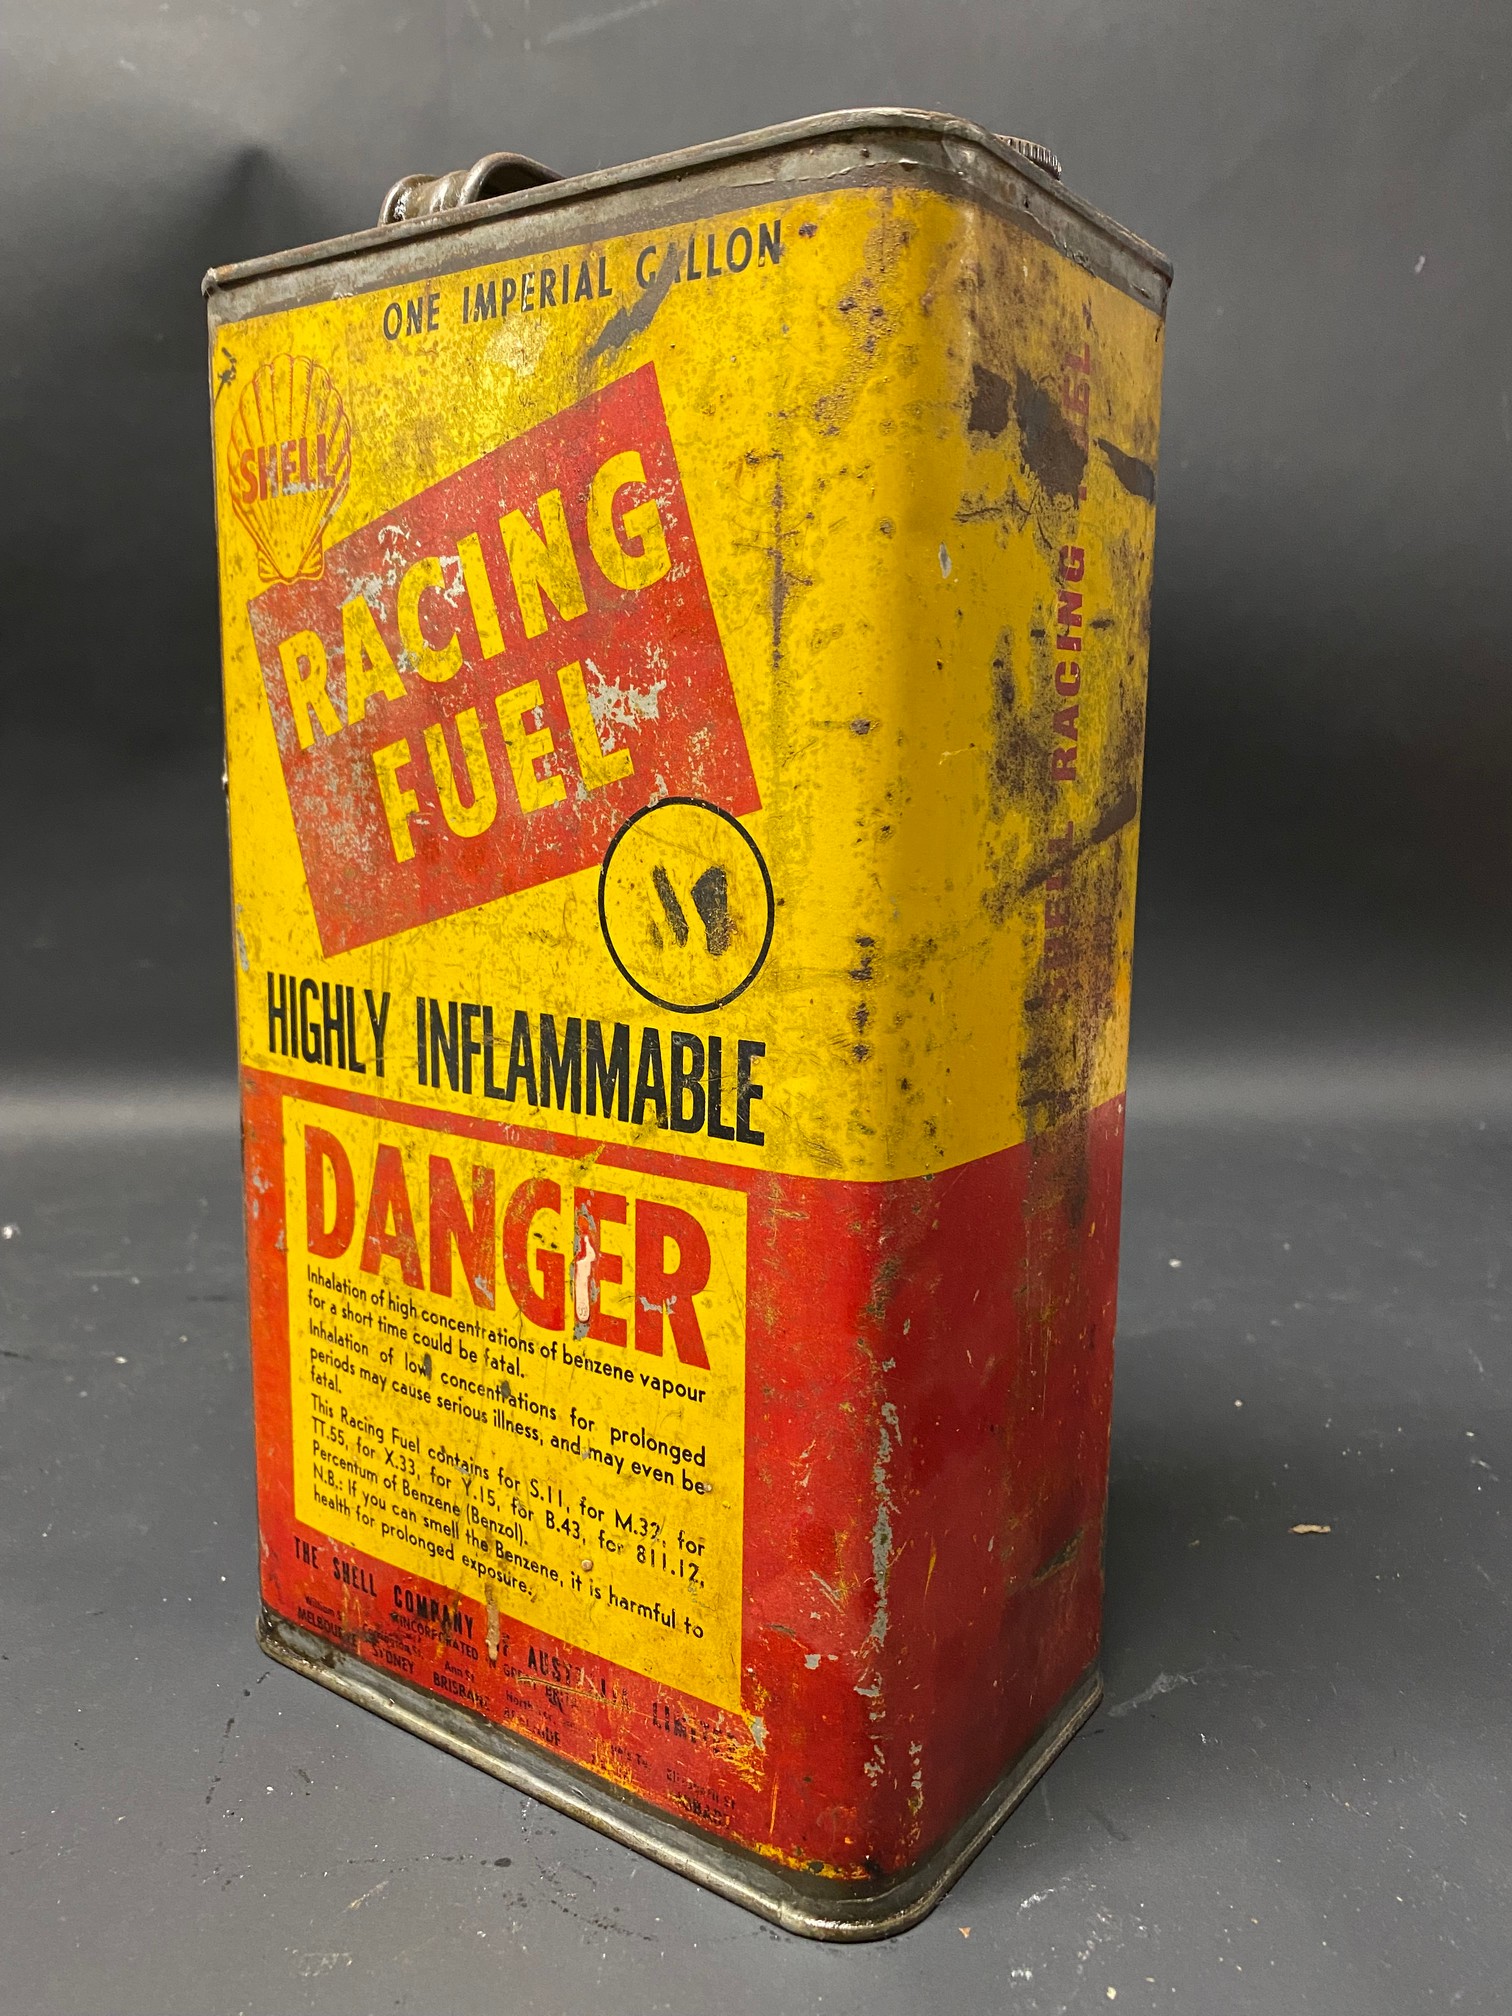 A Shell Racing Fuel gallon can.